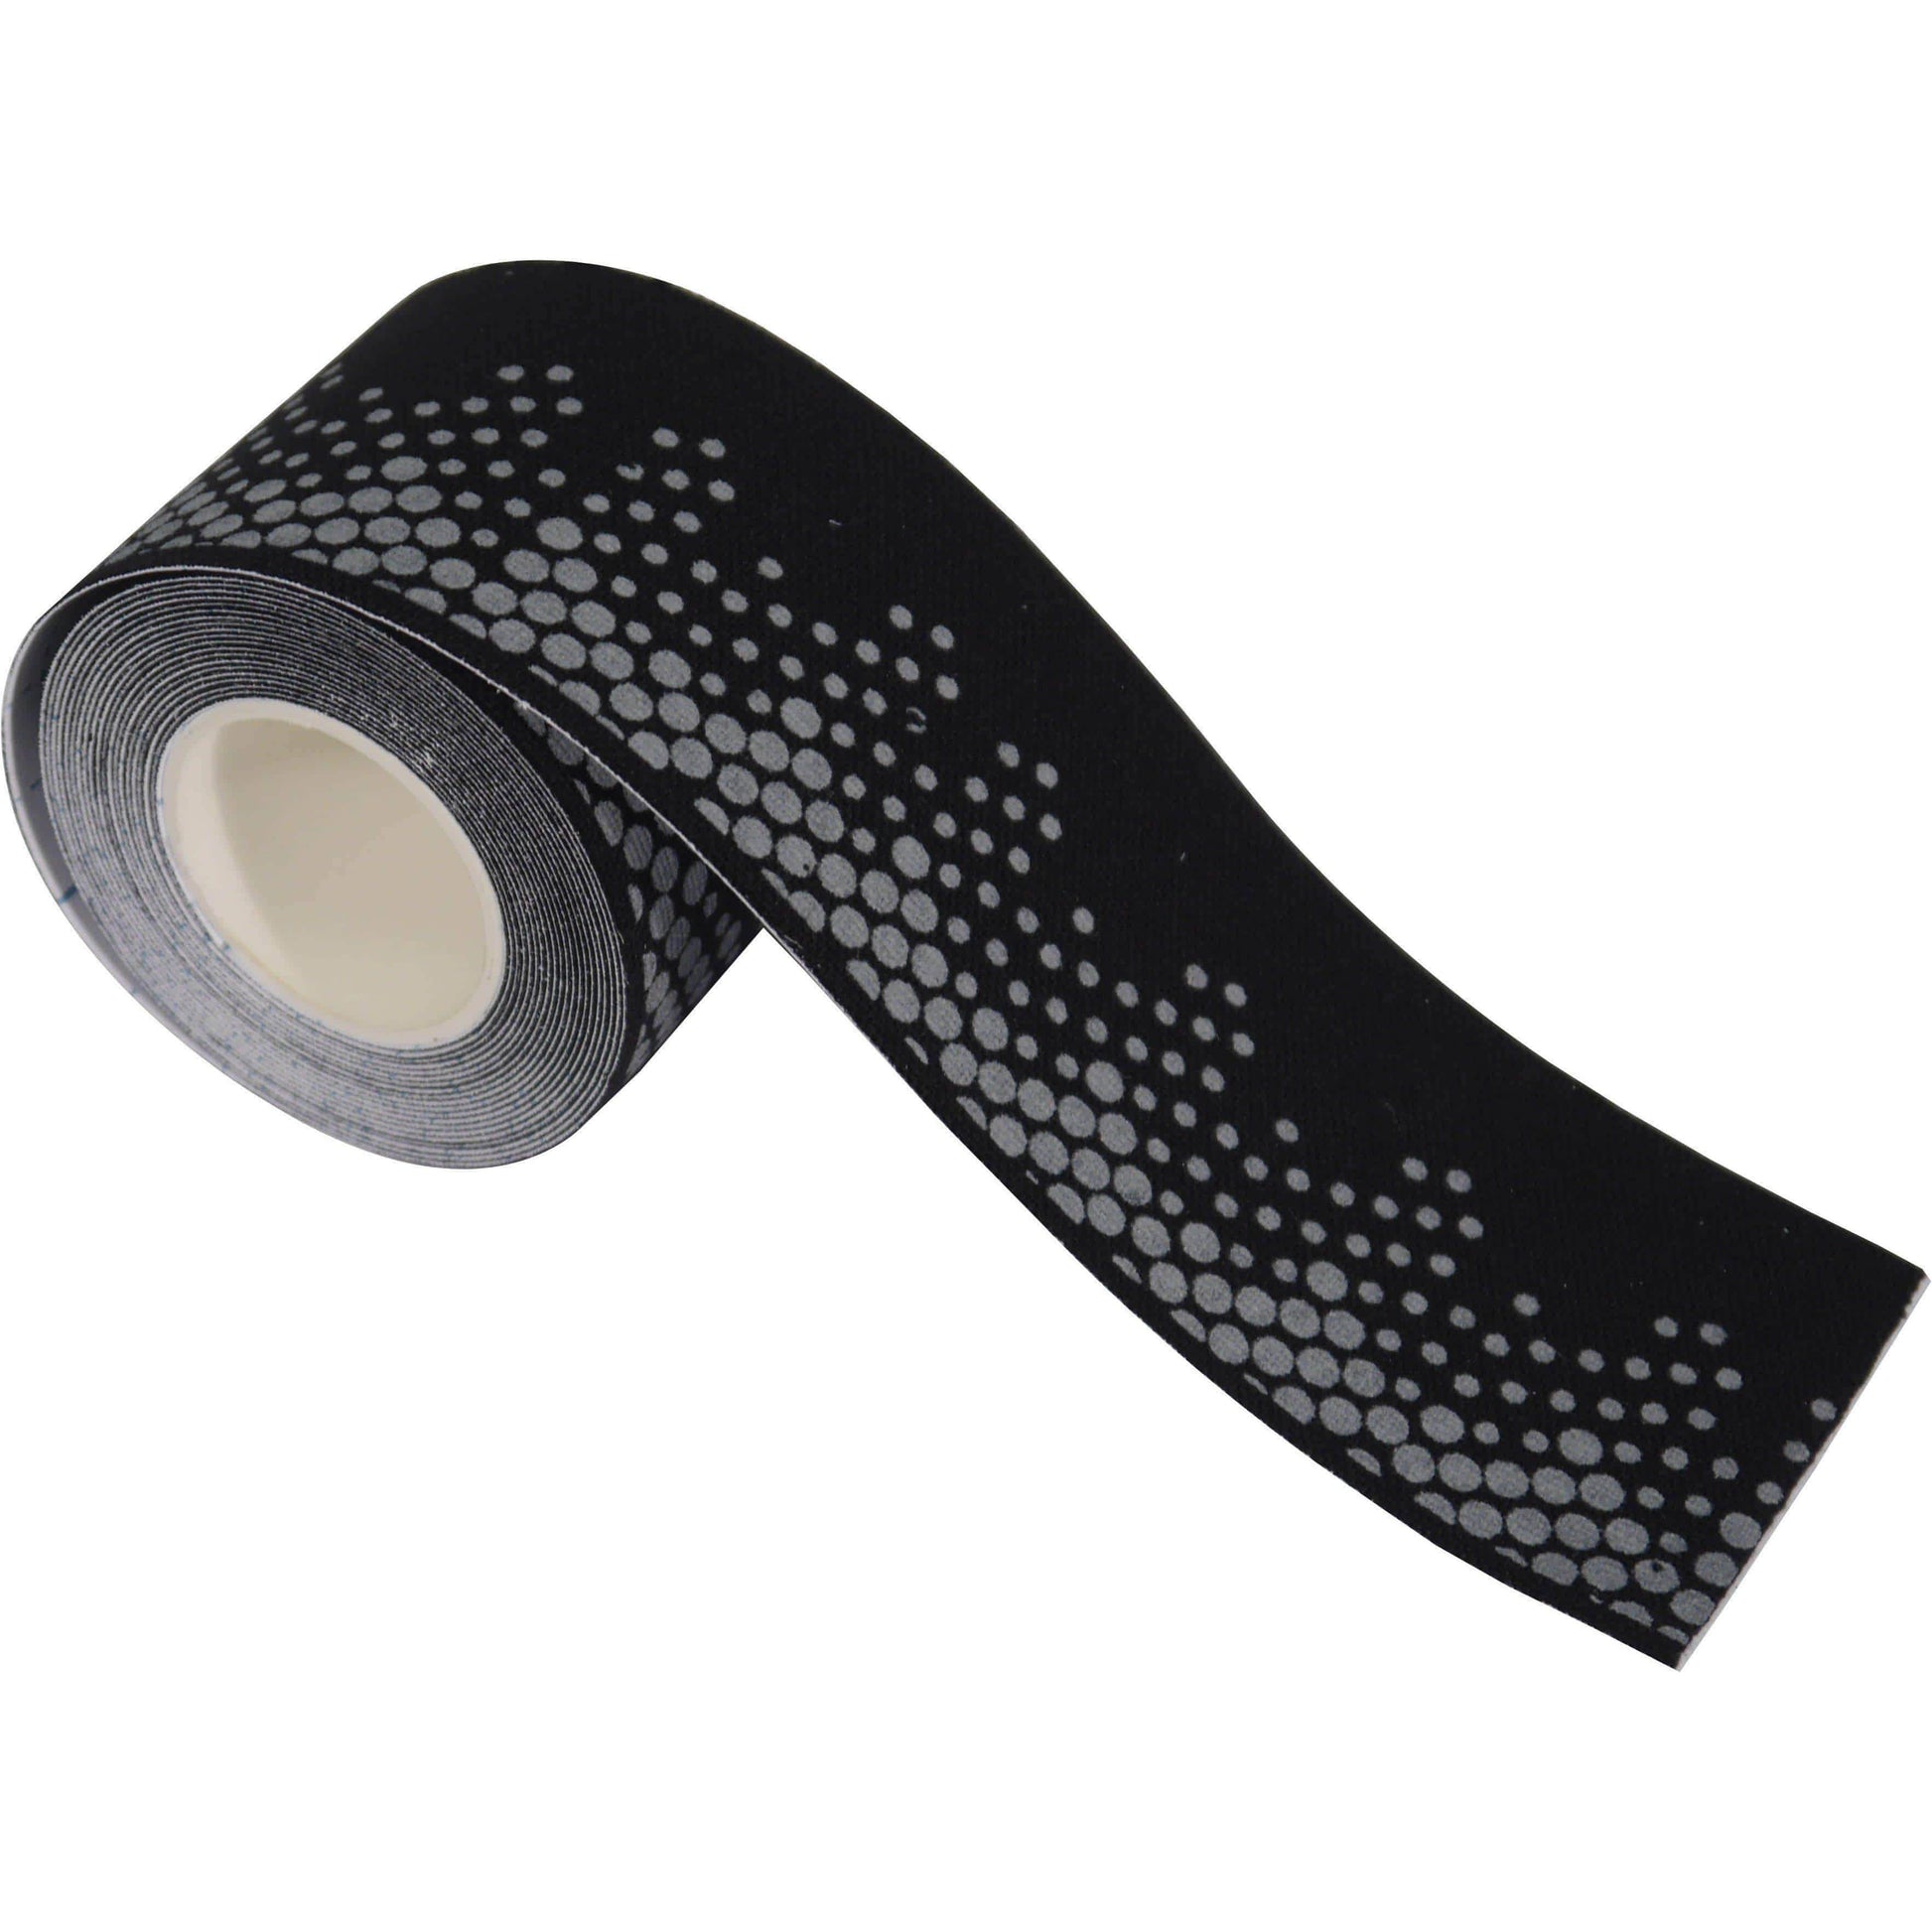 More Mile 3m Reflective Kinesiology Tape - Black 5055604355792 - Start Fitness